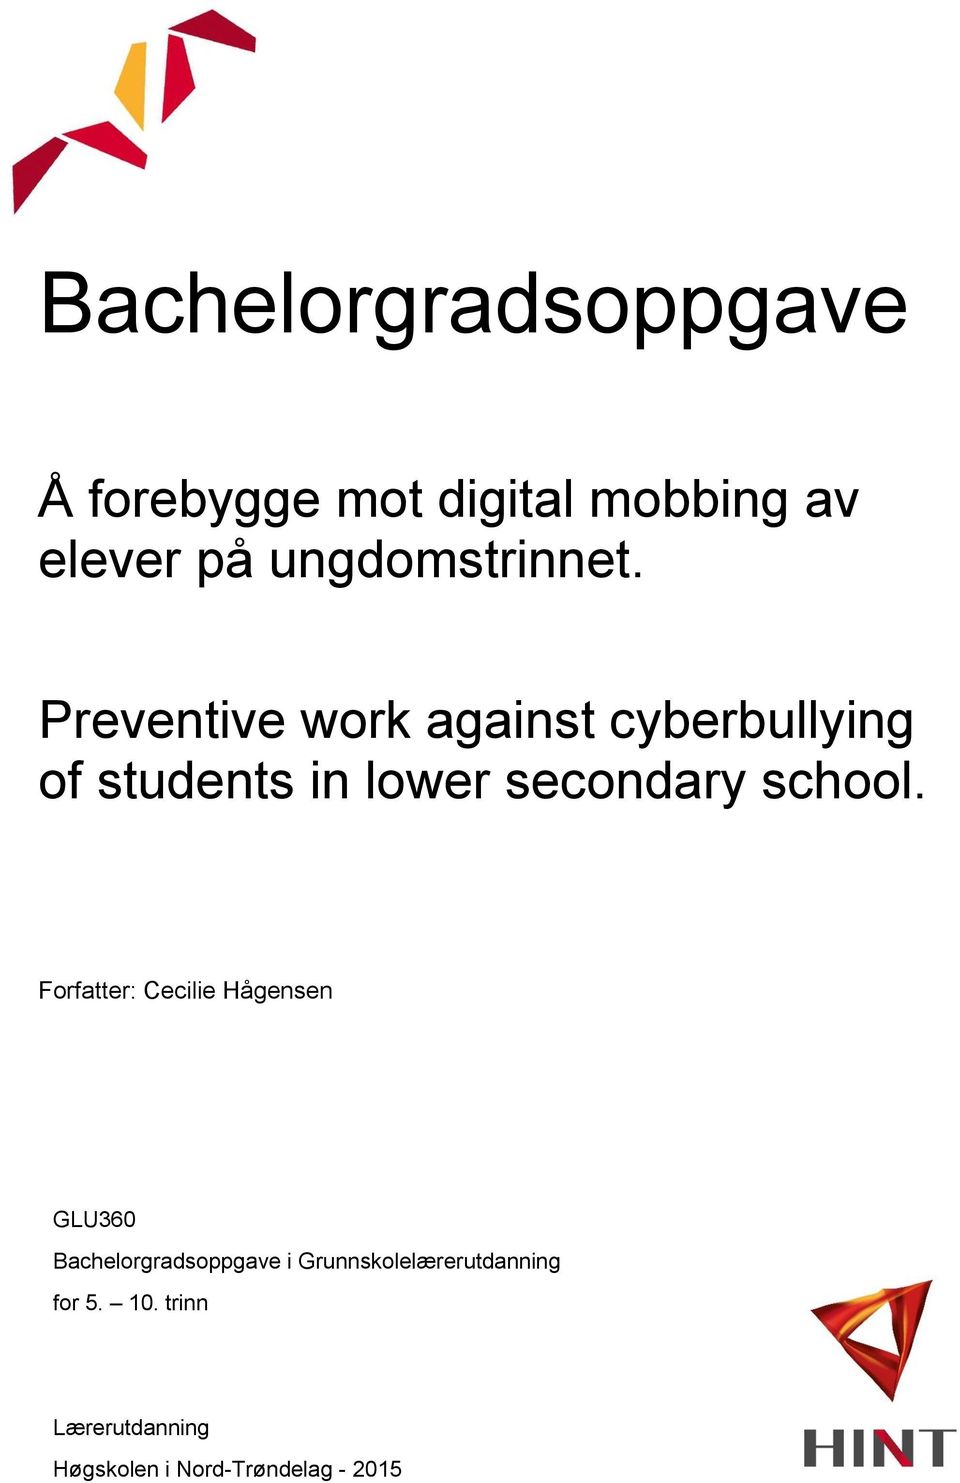 Preventive work against cyberbullying of students in lower secondary school.